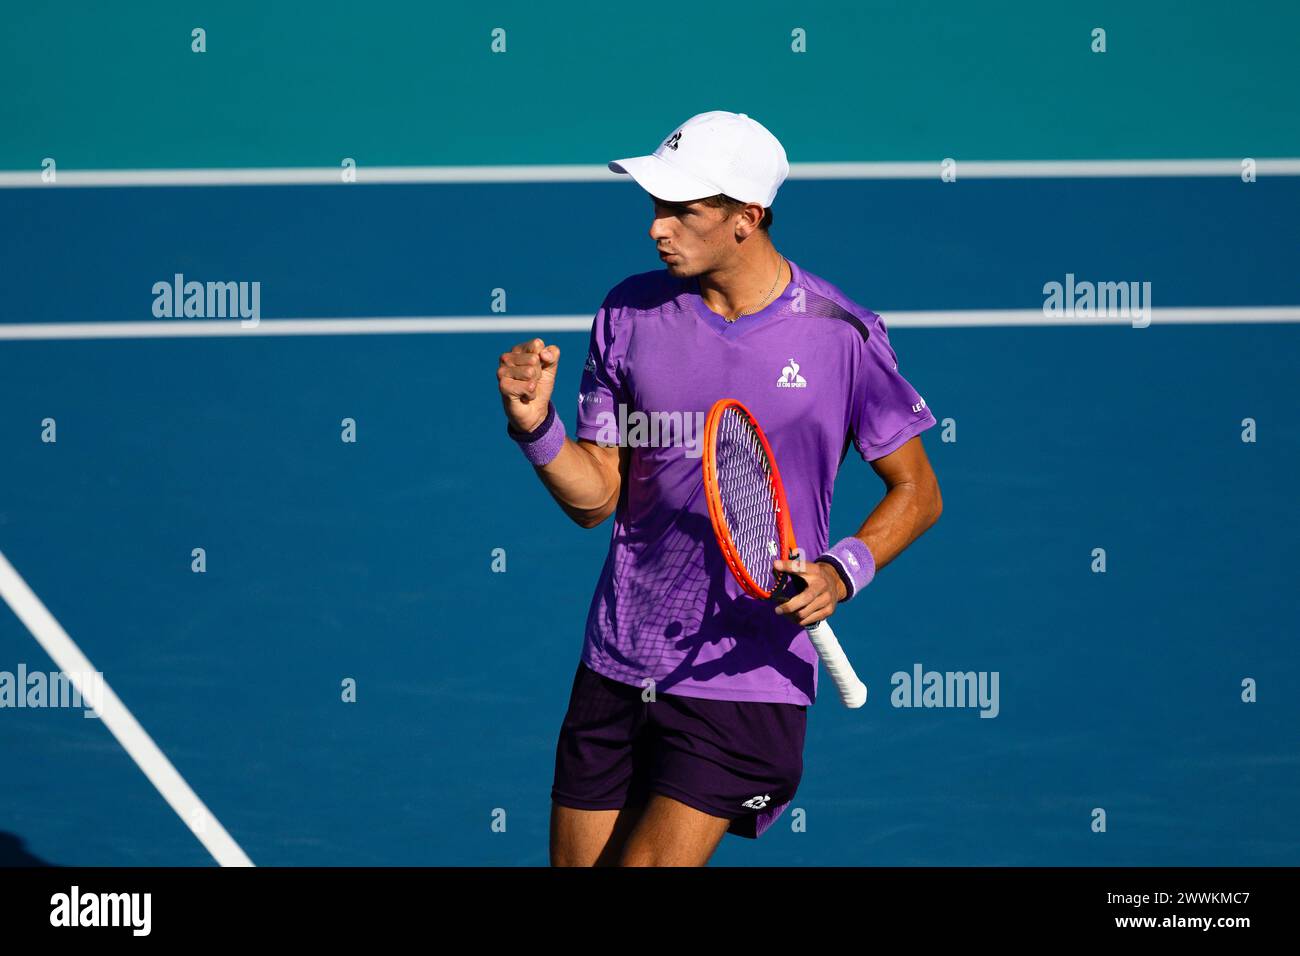 MIAMI GARDENS, FLORIDA - MARCH 24: Matteo Arnaldi of Italy pumps fist against Denis Shapovalov of Canada during their match on Day 9 of the Miami Open at Hard Rock Stadium on March 24, 2024 in Miami Gardens, Florida. (Photo by Mauricio Paiz) Credit: Mauricio Paiz/Alamy Live News Stock Photo